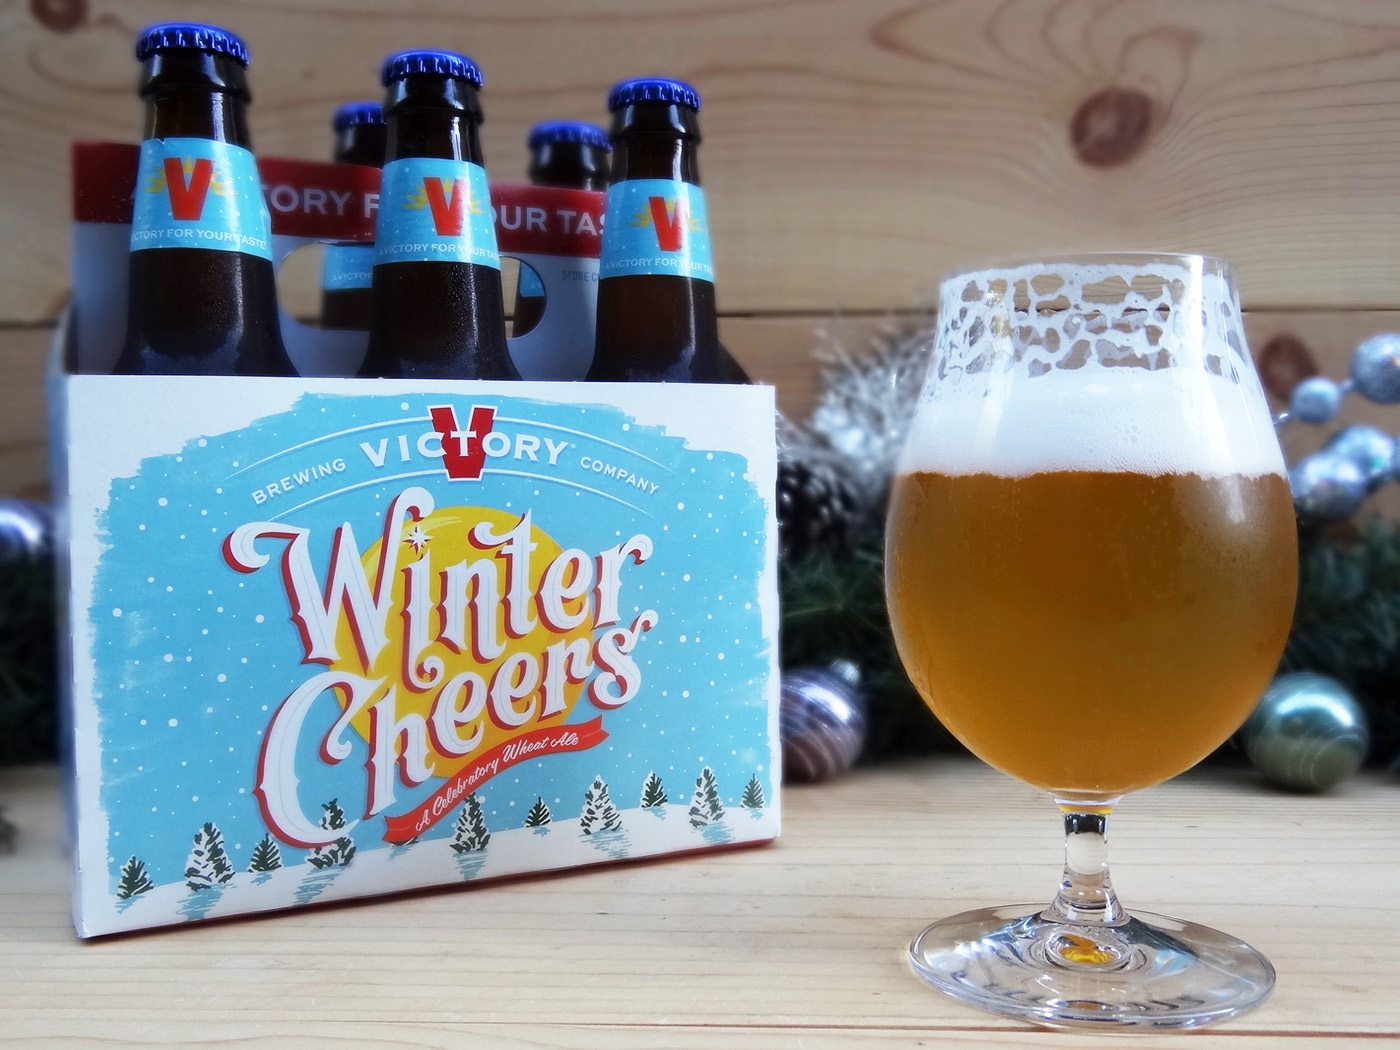 Winter Cheers lives up to its name, fueling festive times and chasing winter’s chill